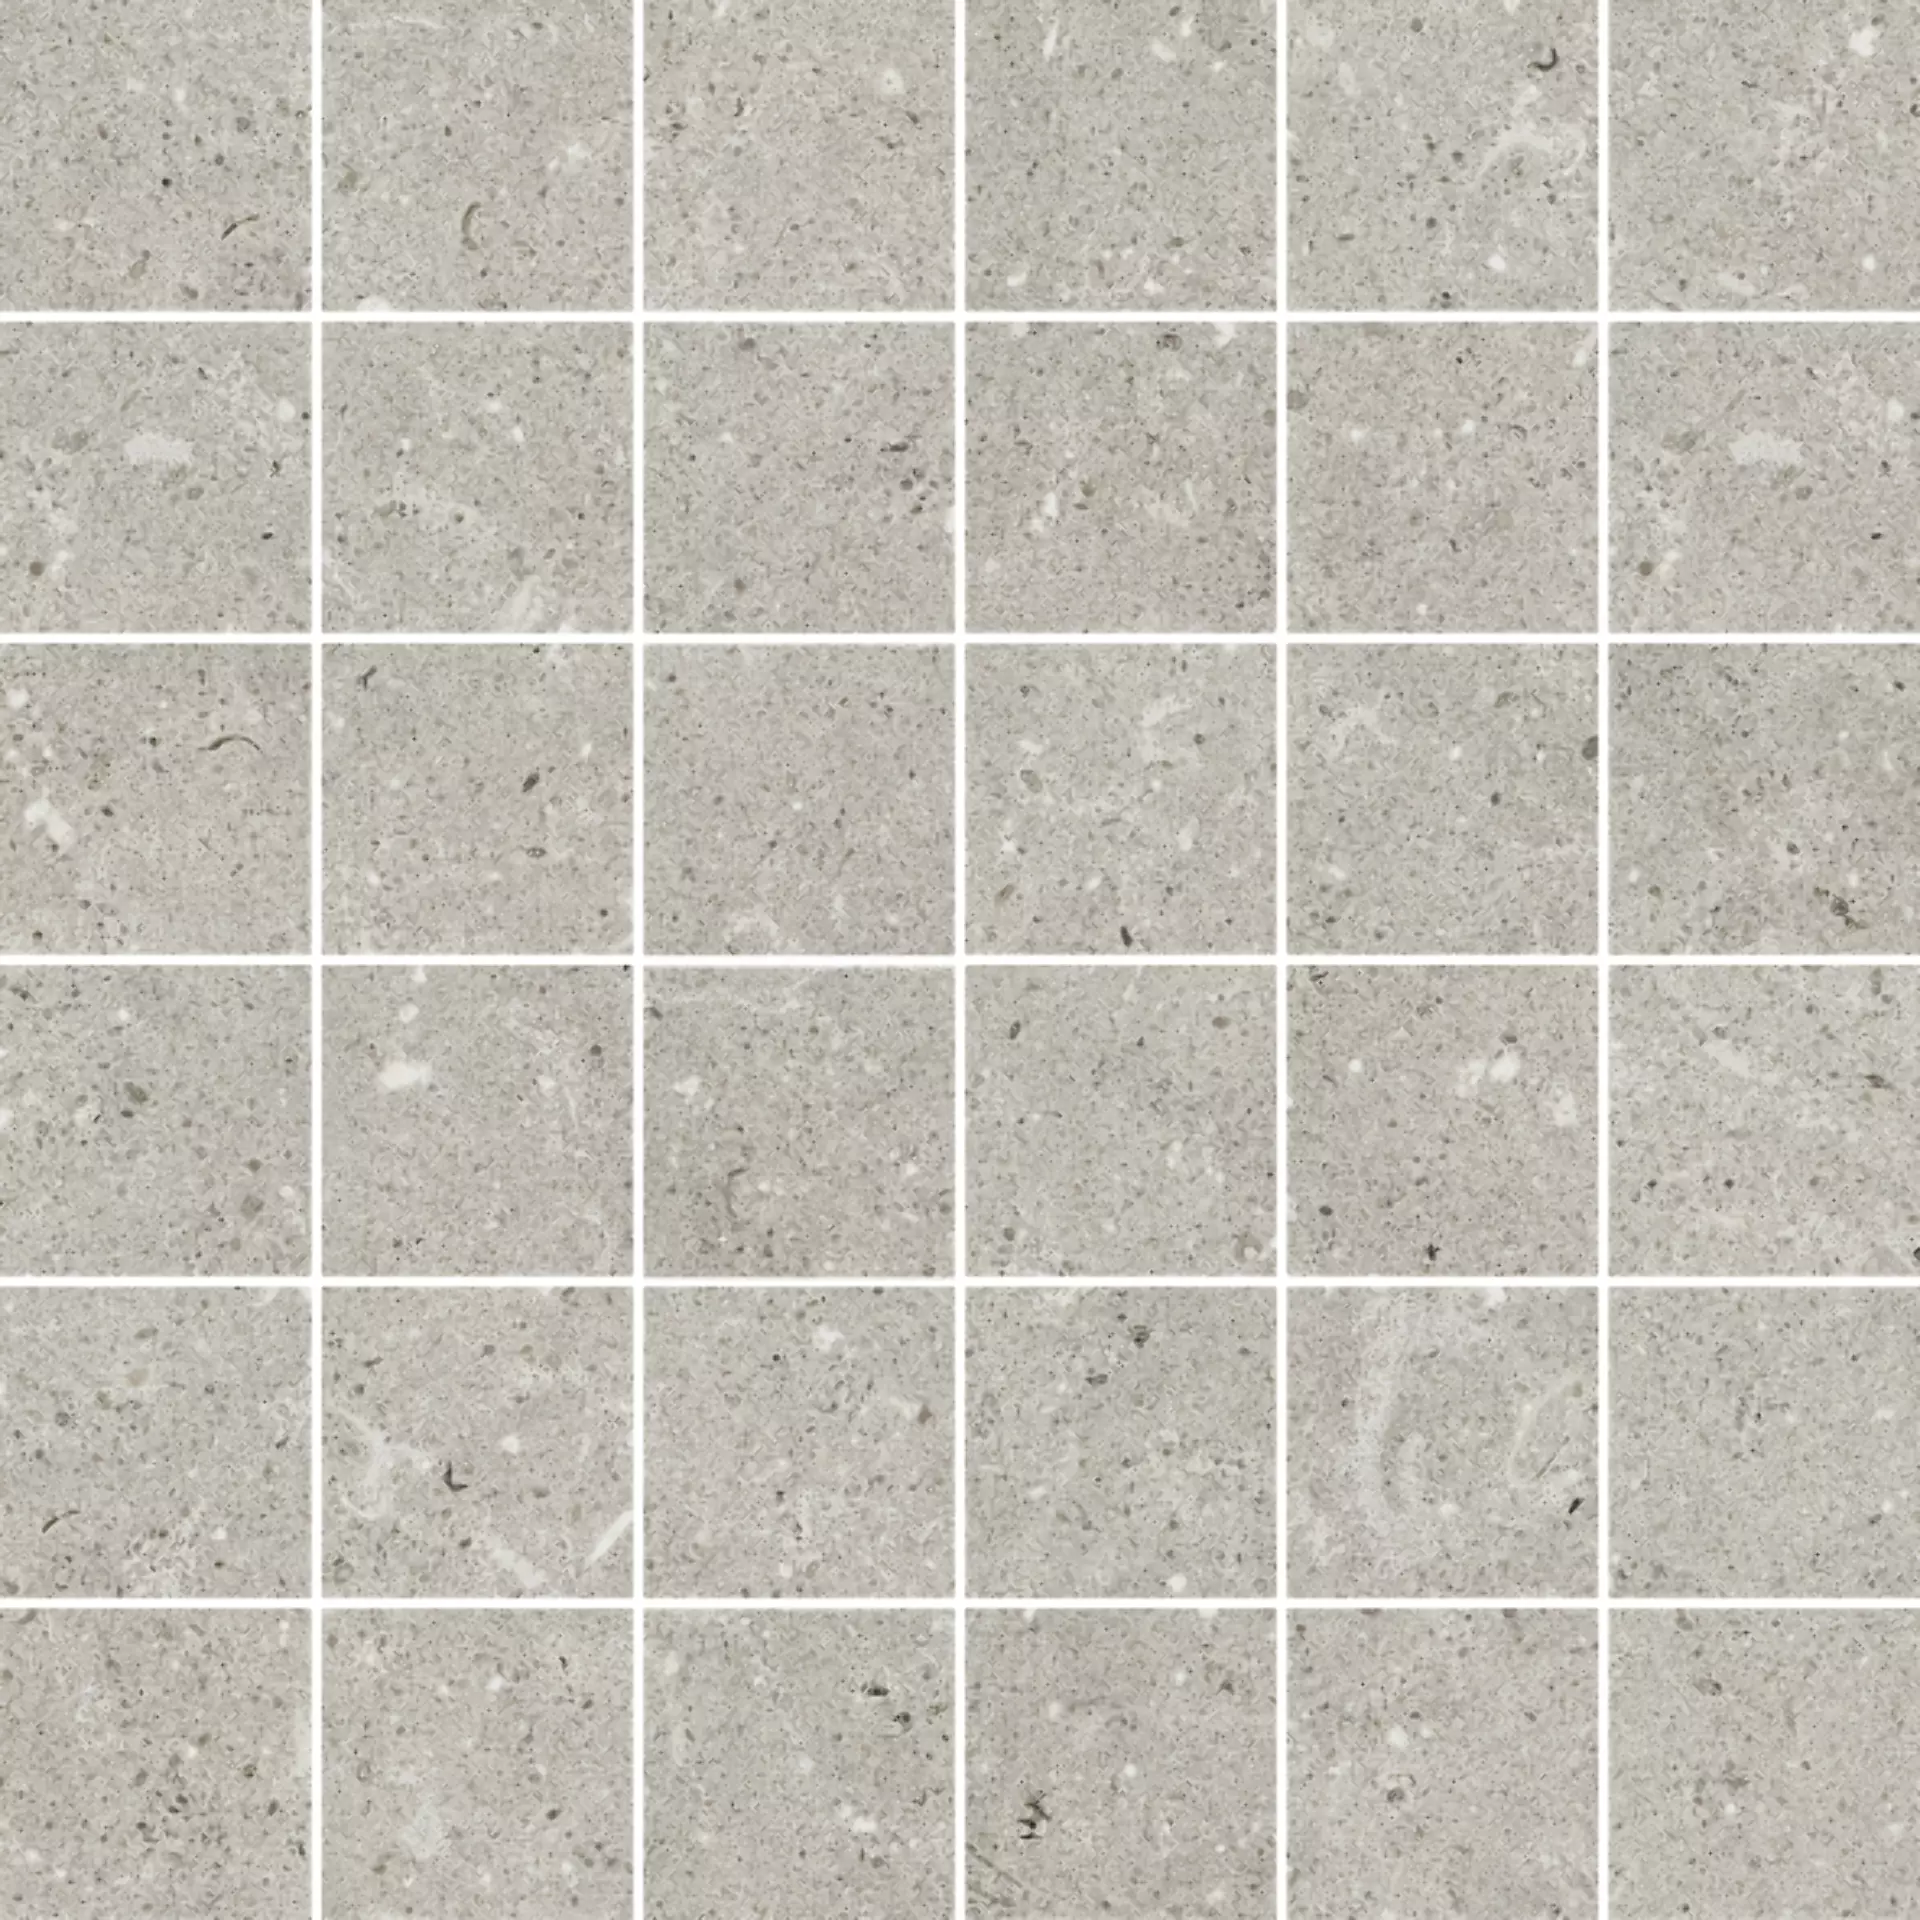 Del Conca Hwd Wild Grey Hwd Naturale Mosaic G3WD05MO 30x30cm rectified 8,5mm